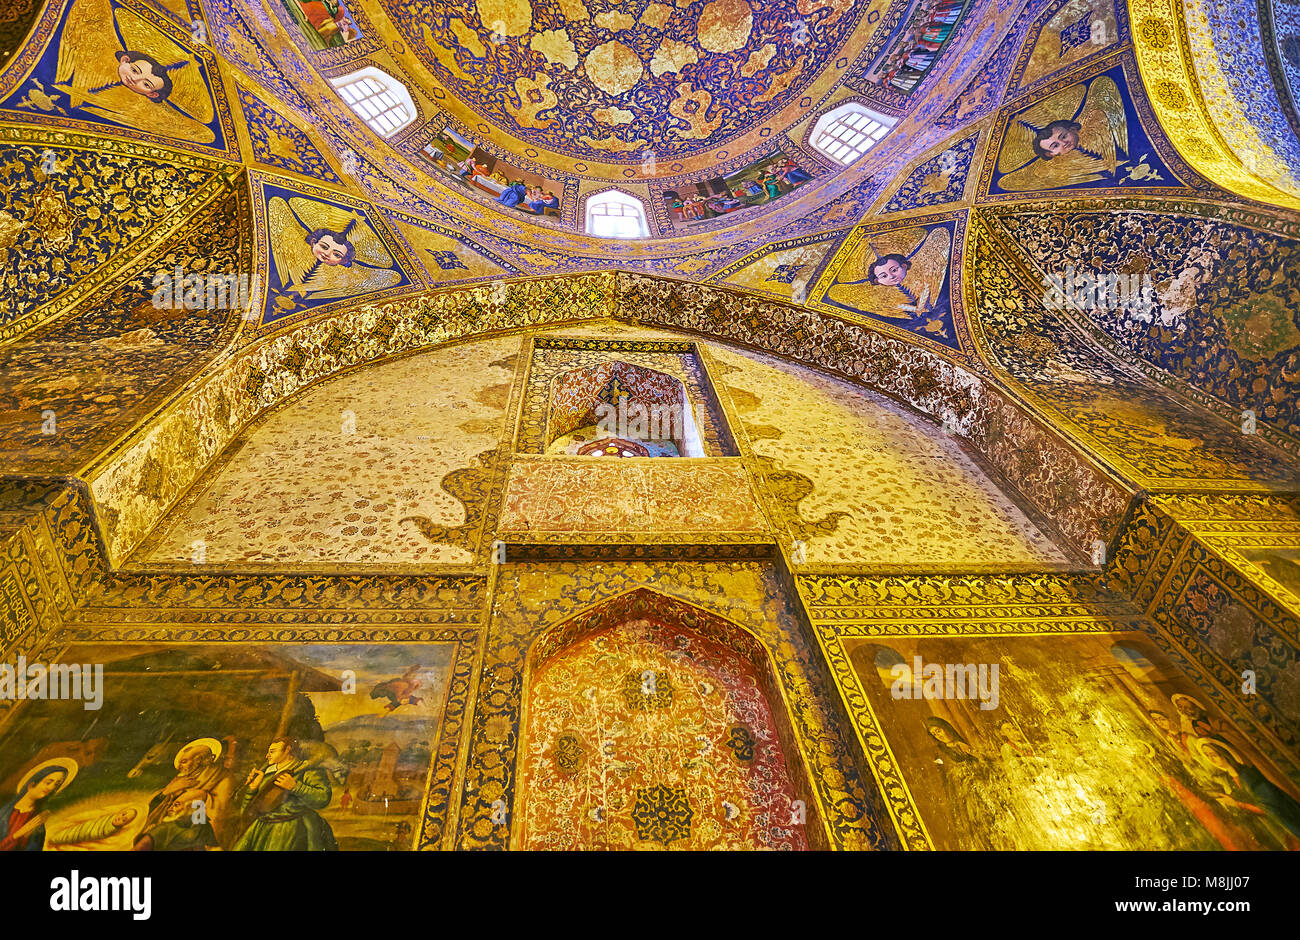 ISFAHAN, IRAN - OCTOBER 20,2017: The wall of Armenian Orthodox Bethlehem Church in New Julfa is covered with murals and fine floral golden patterns, o Stock Photo